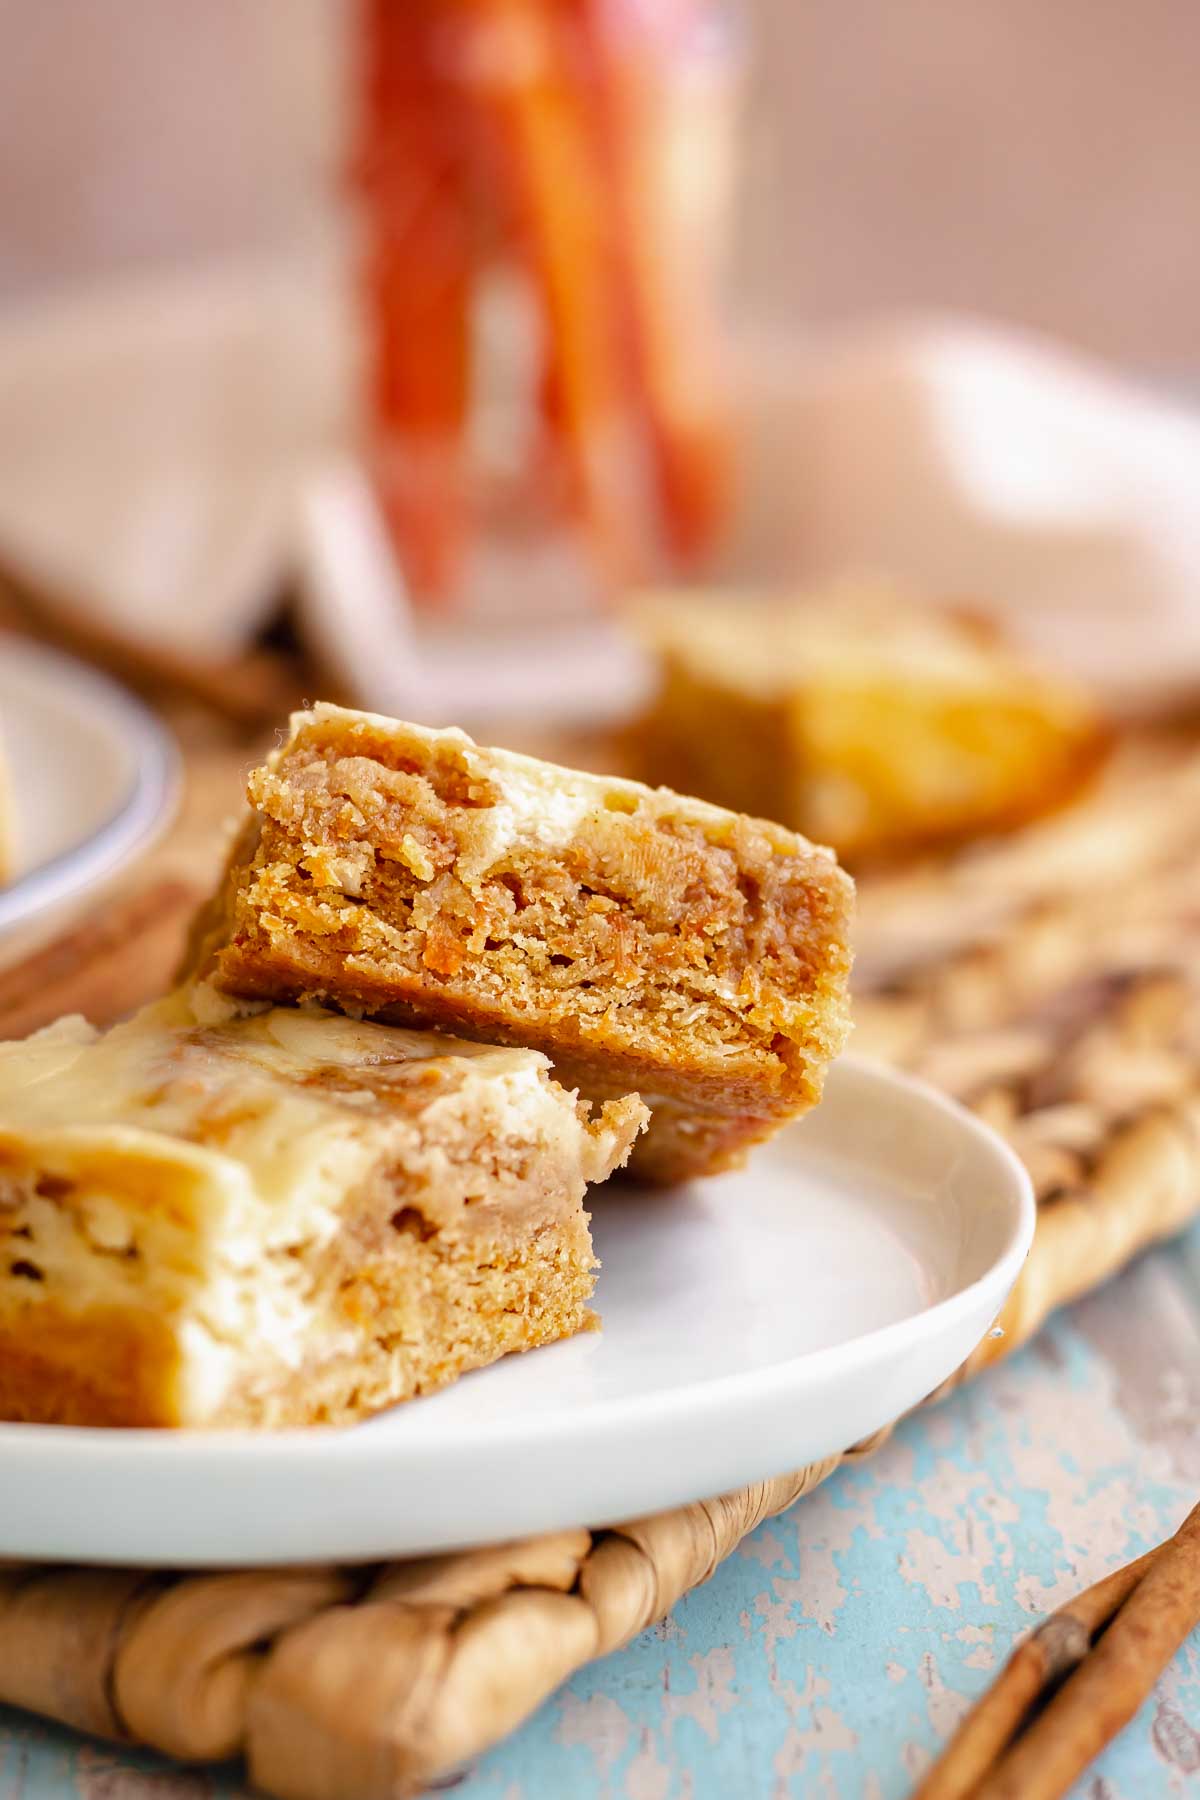 Carrot cake blondies leaning on each other on a plate.